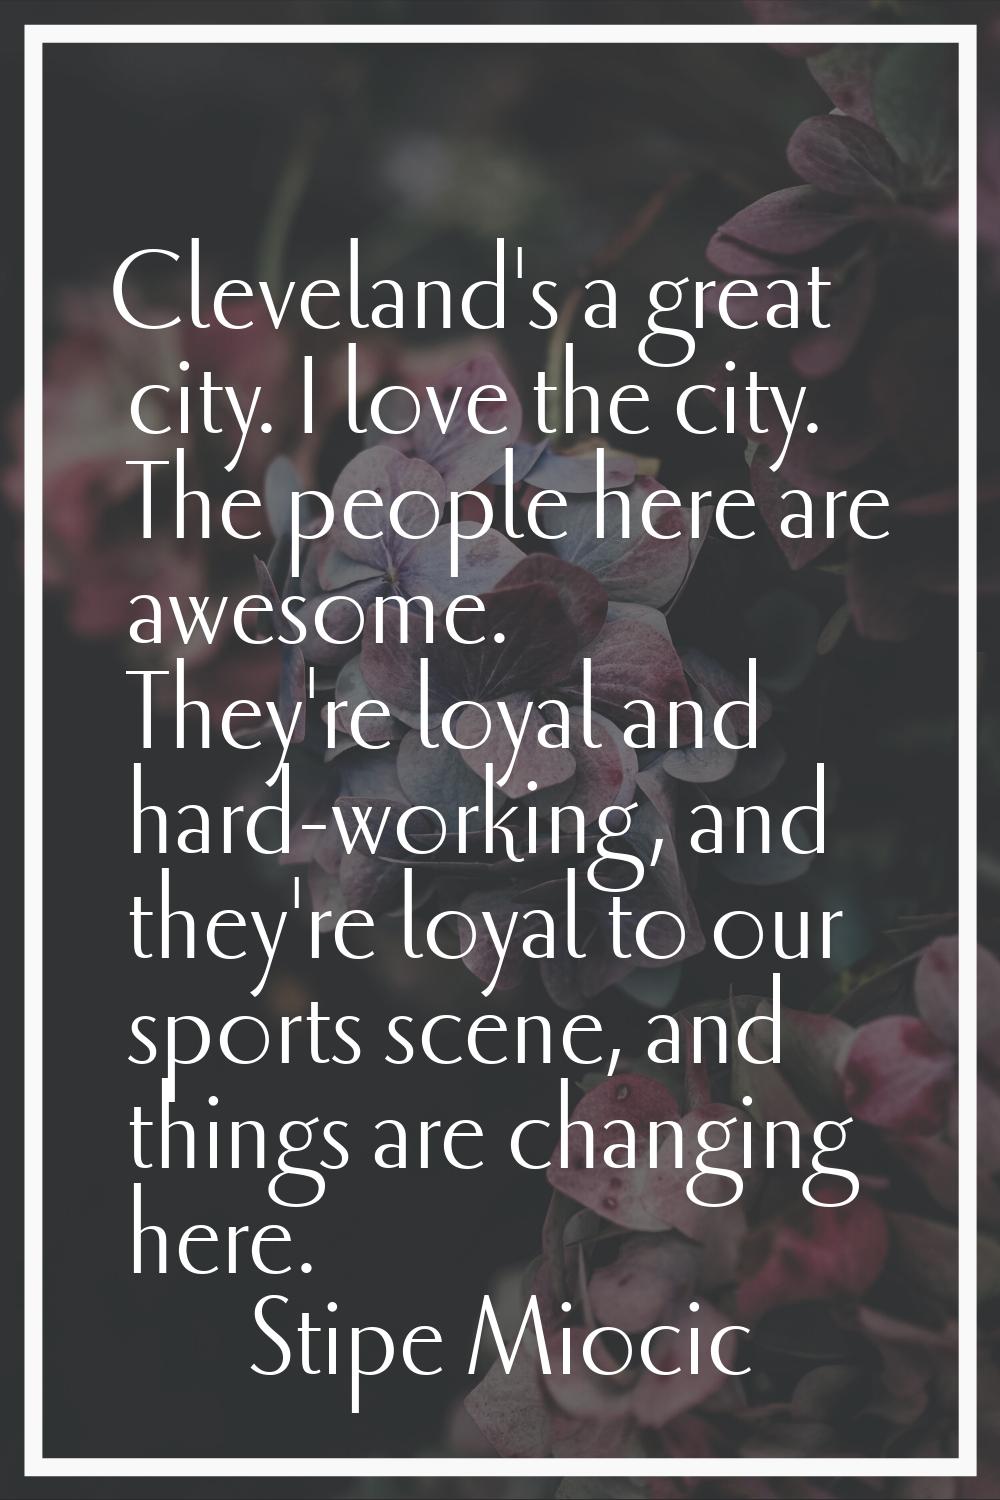 Cleveland's a great city. I love the city. The people here are awesome. They're loyal and hard-work